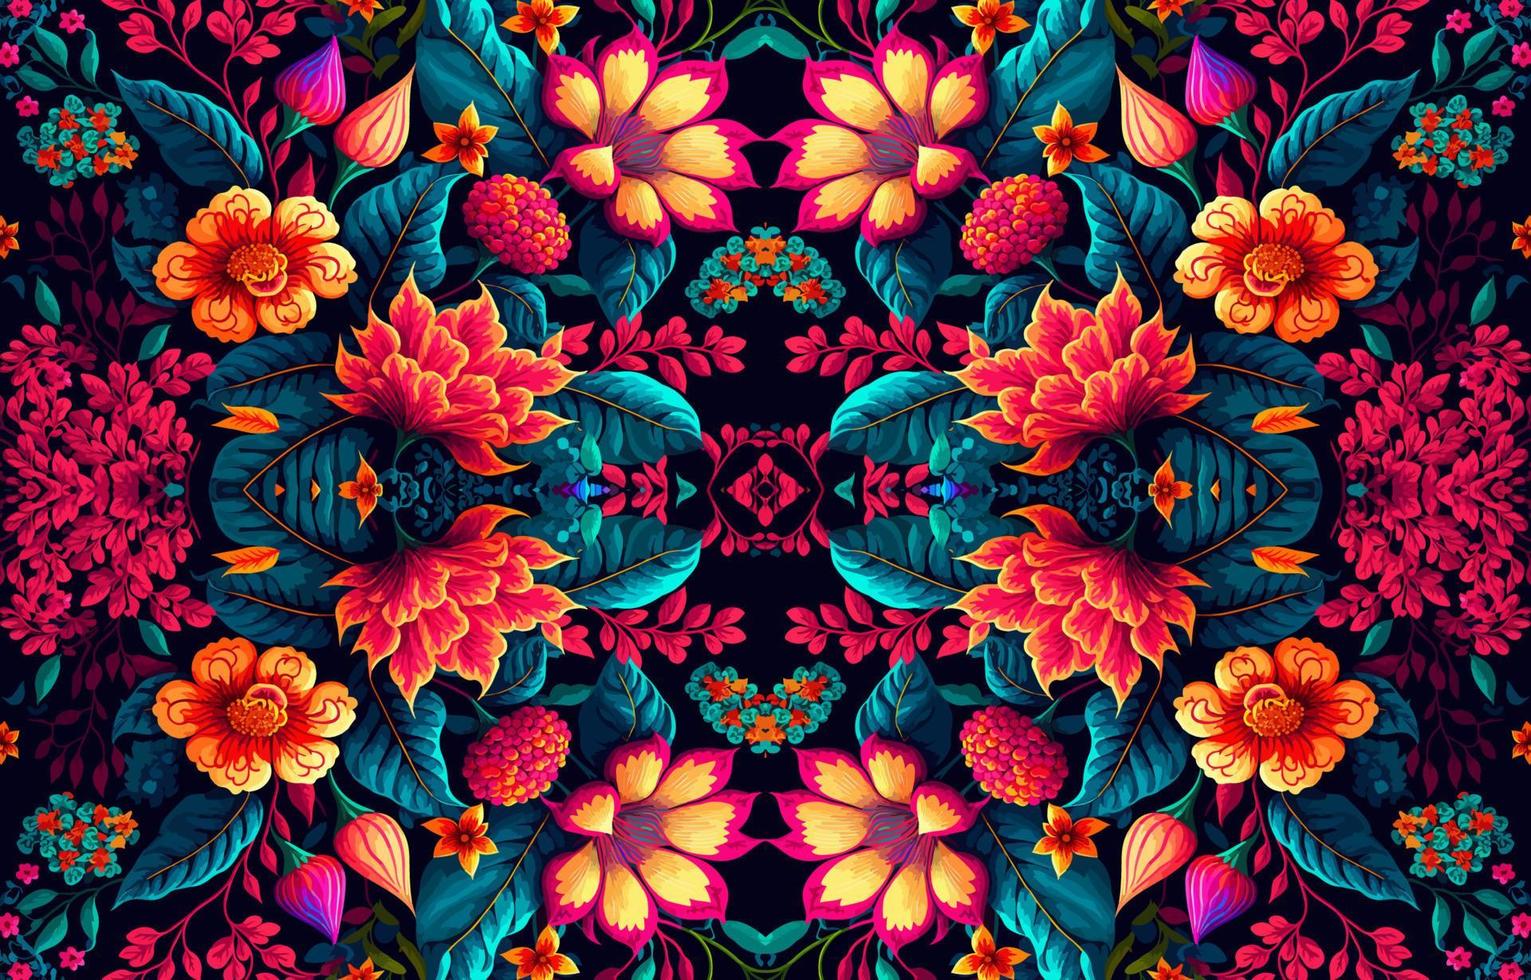 Floral seamless fabric pattern on black background. Abstract fabric textile line graphic flower blooming antique. Ethnic colorful flowers garden vector ornate elegant luxury vintage retro style.